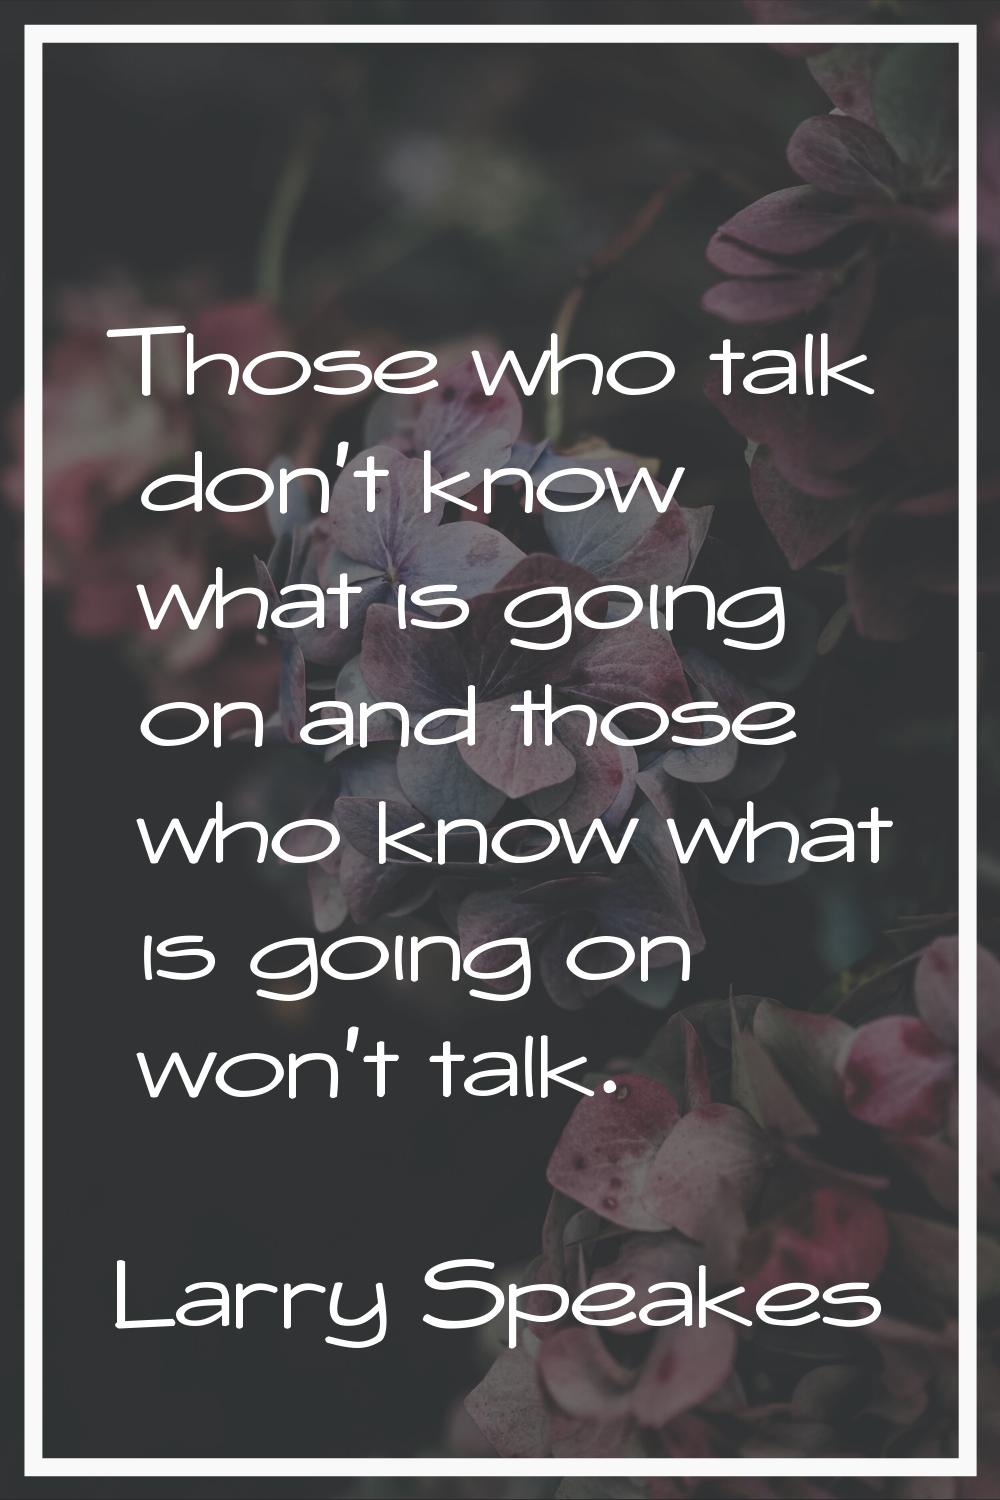 Those who talk don't know what is going on and those who know what is going on won't talk.